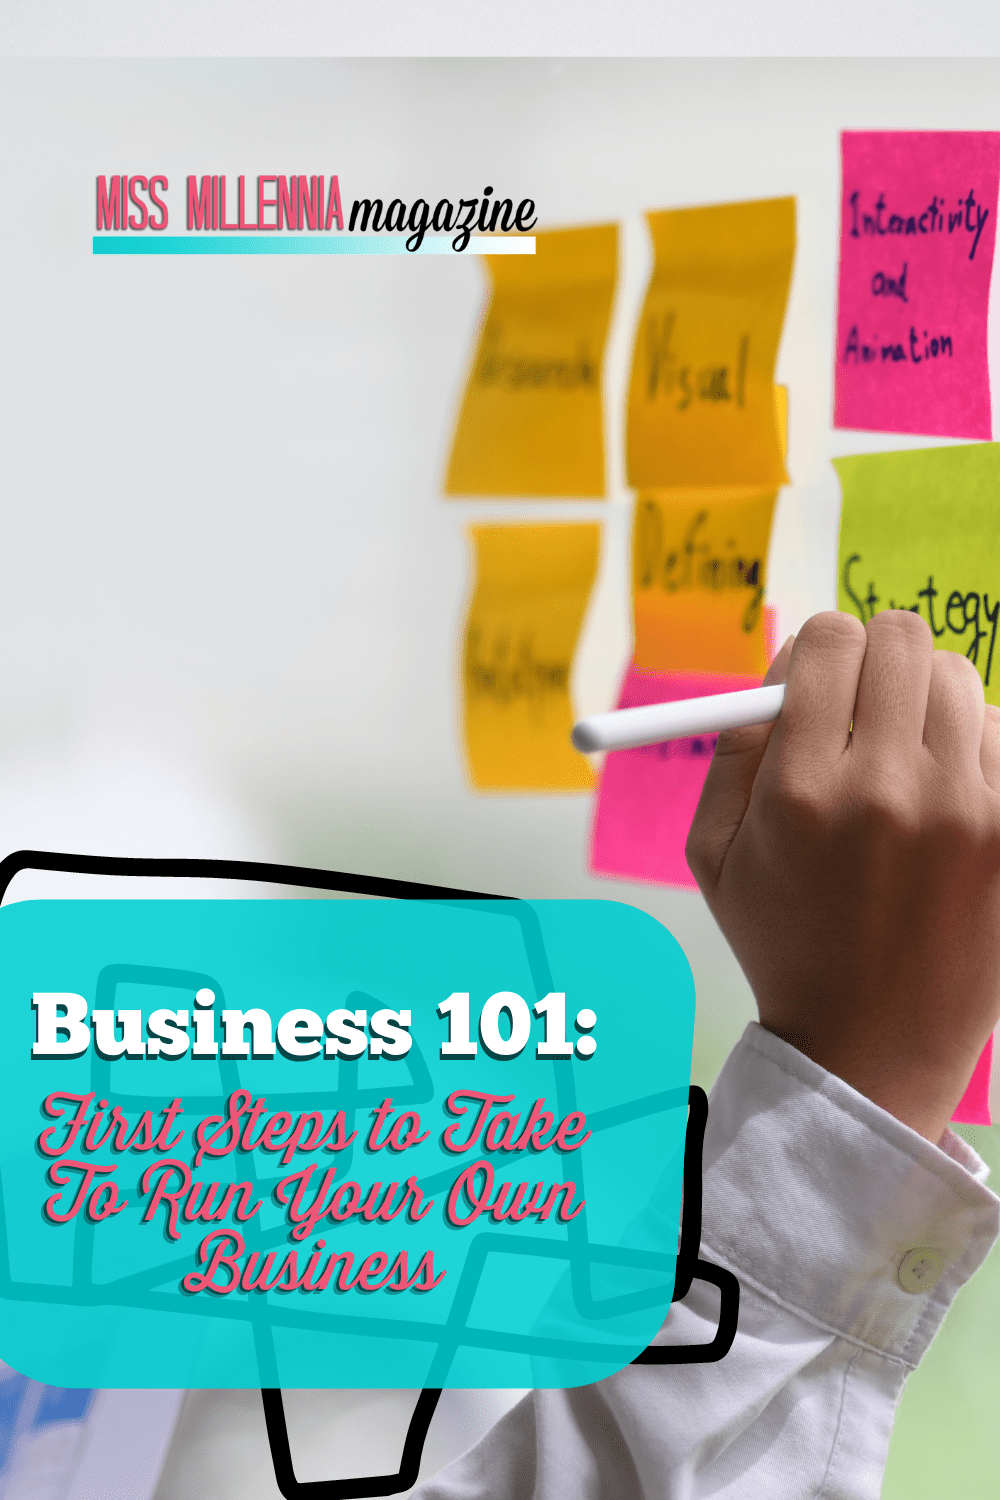 Business 101: First Steps to Take To Run Your Own Business